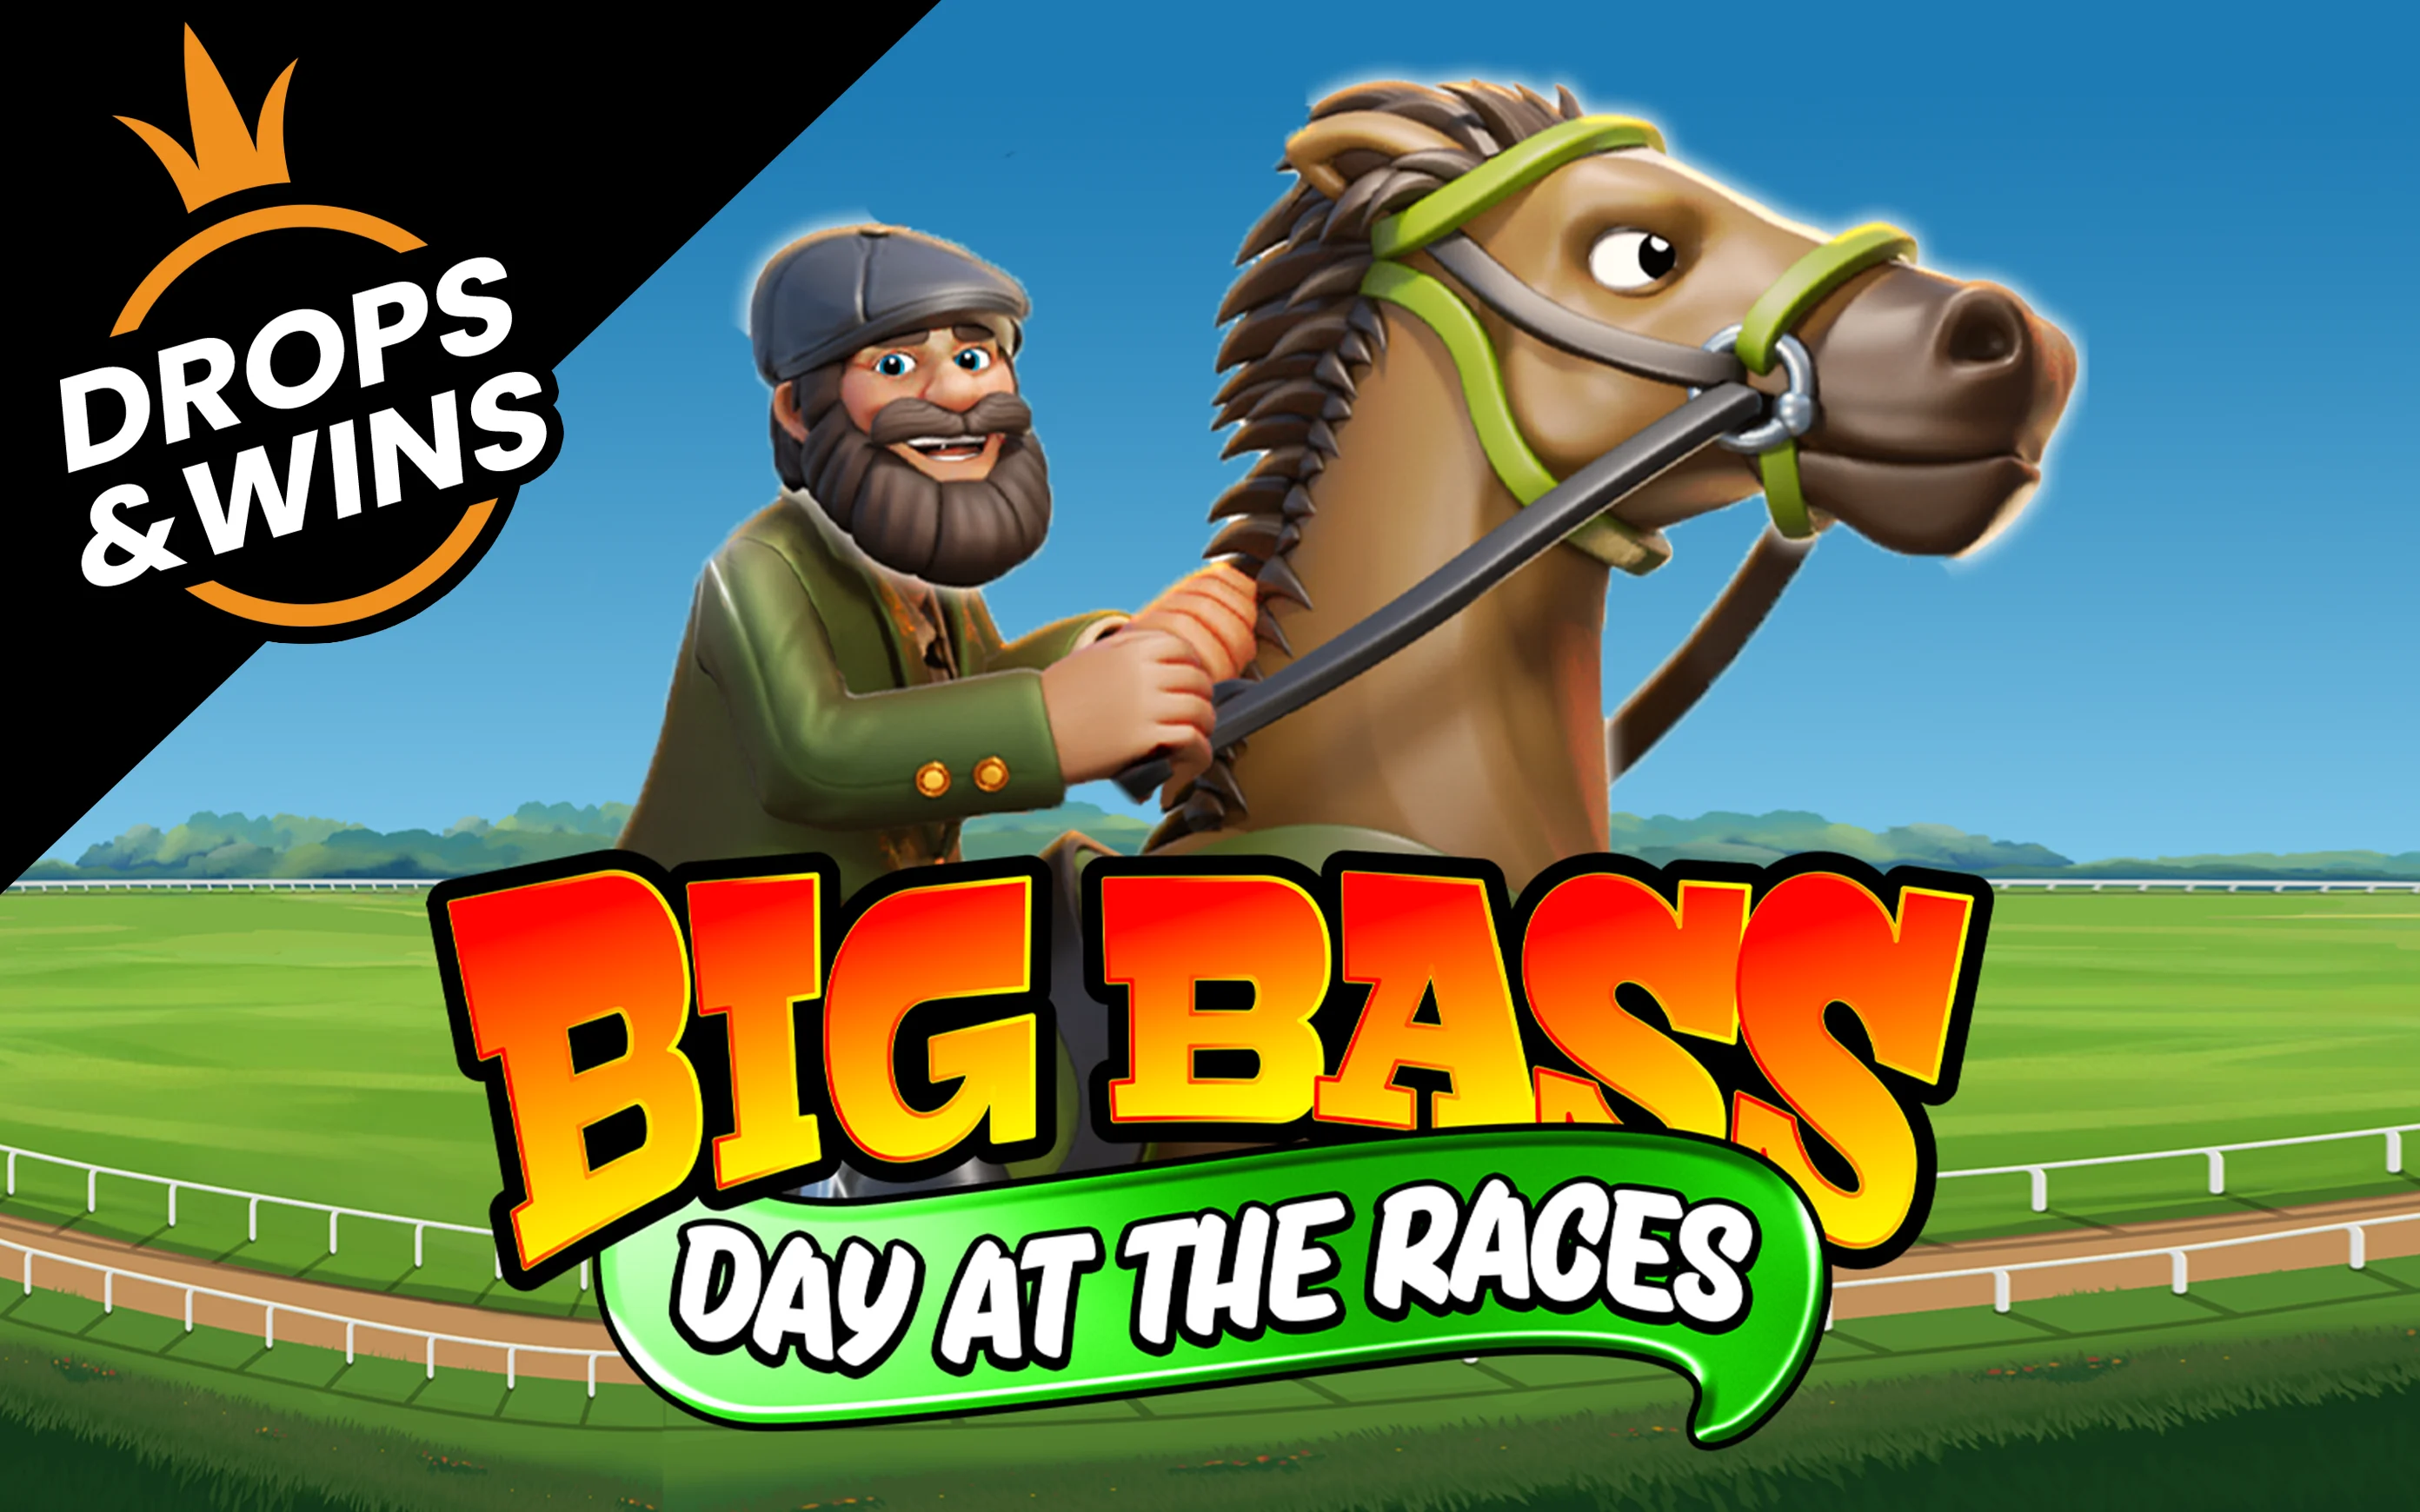 Gioca a Big Bass Day at the Races sul casino online Starcasino.be